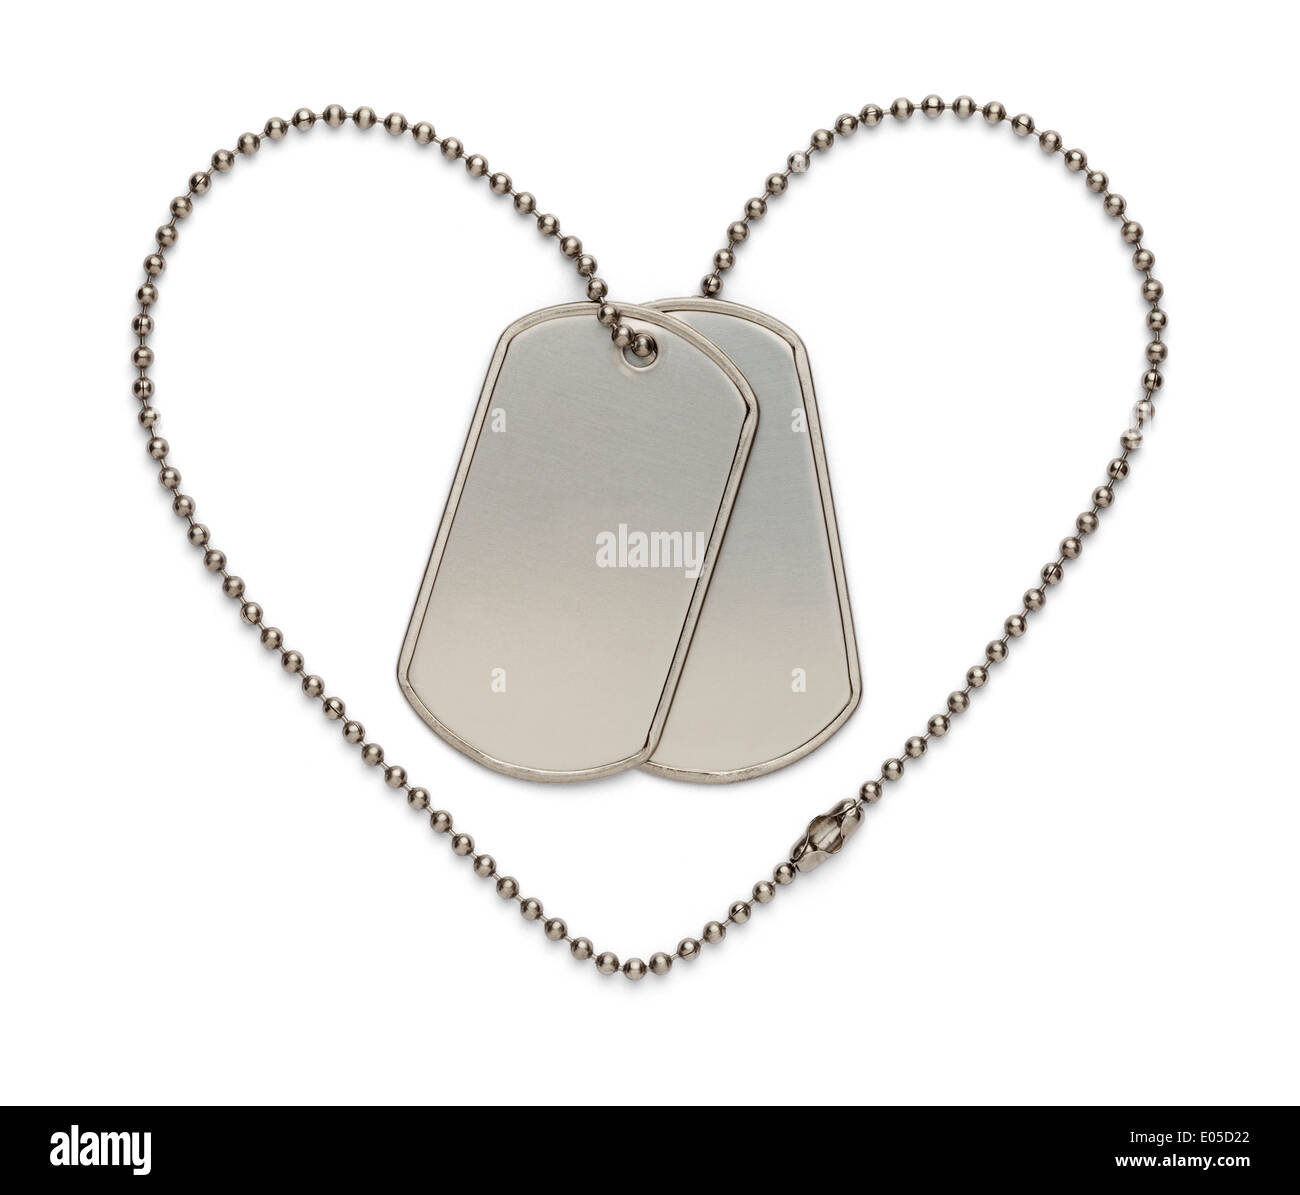 Dog Tags in Shape of Heart to Support the Troops and The Fallen. Isolated on a White Background. Stock Photo